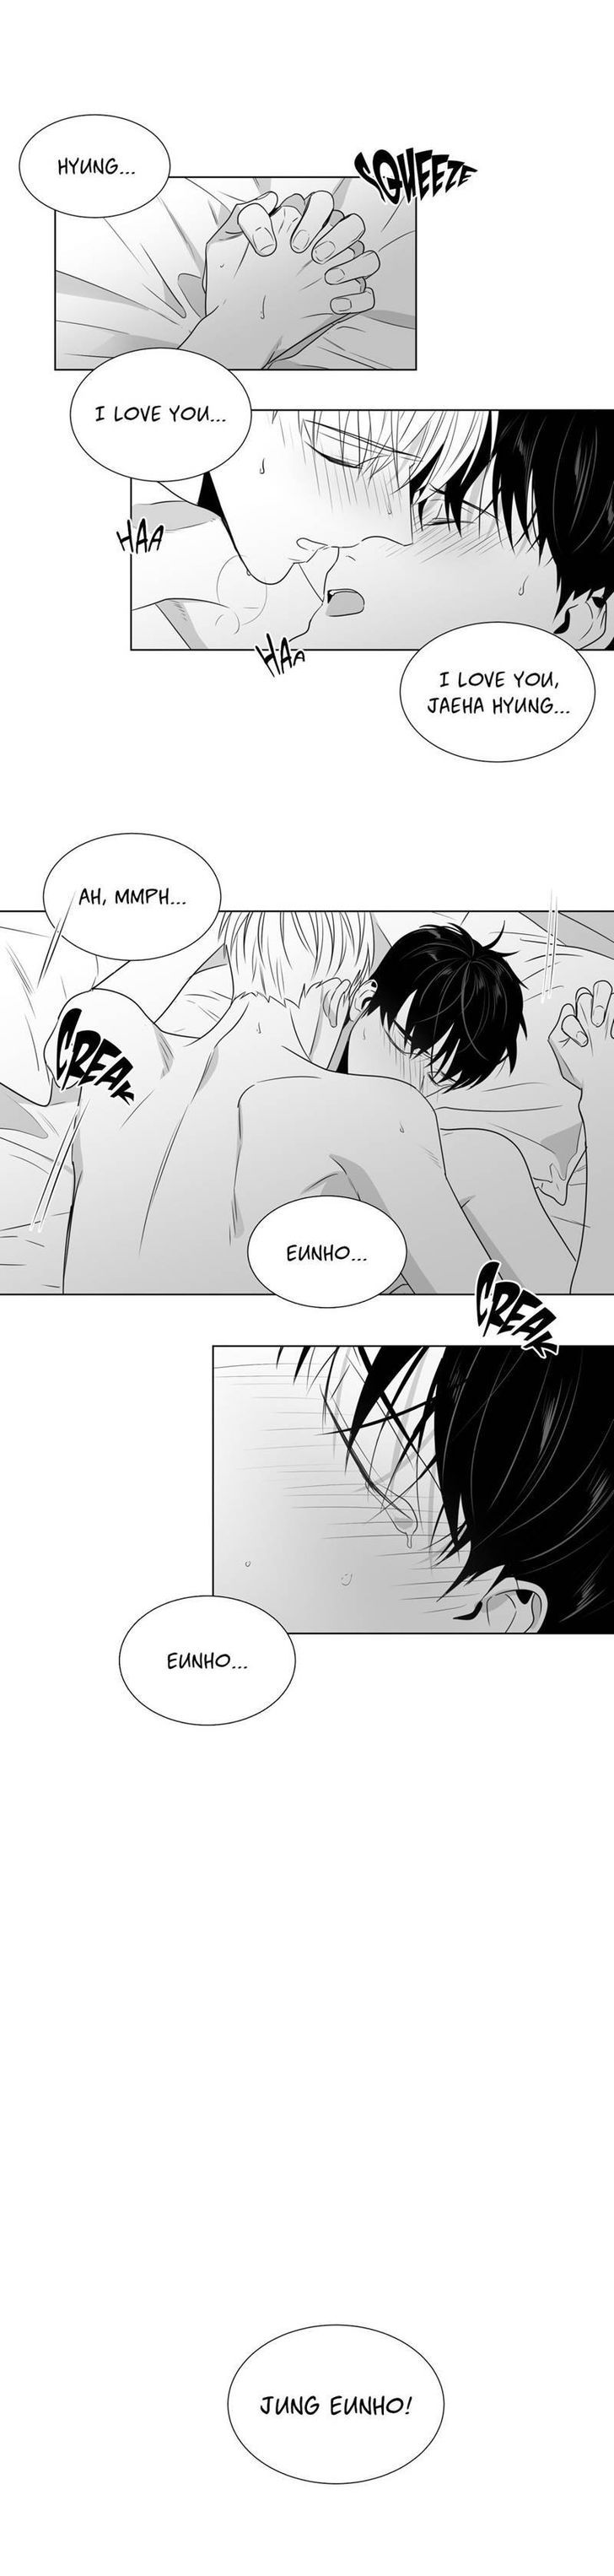 Lover Boy (Lezhin) Chapter 044 page 8